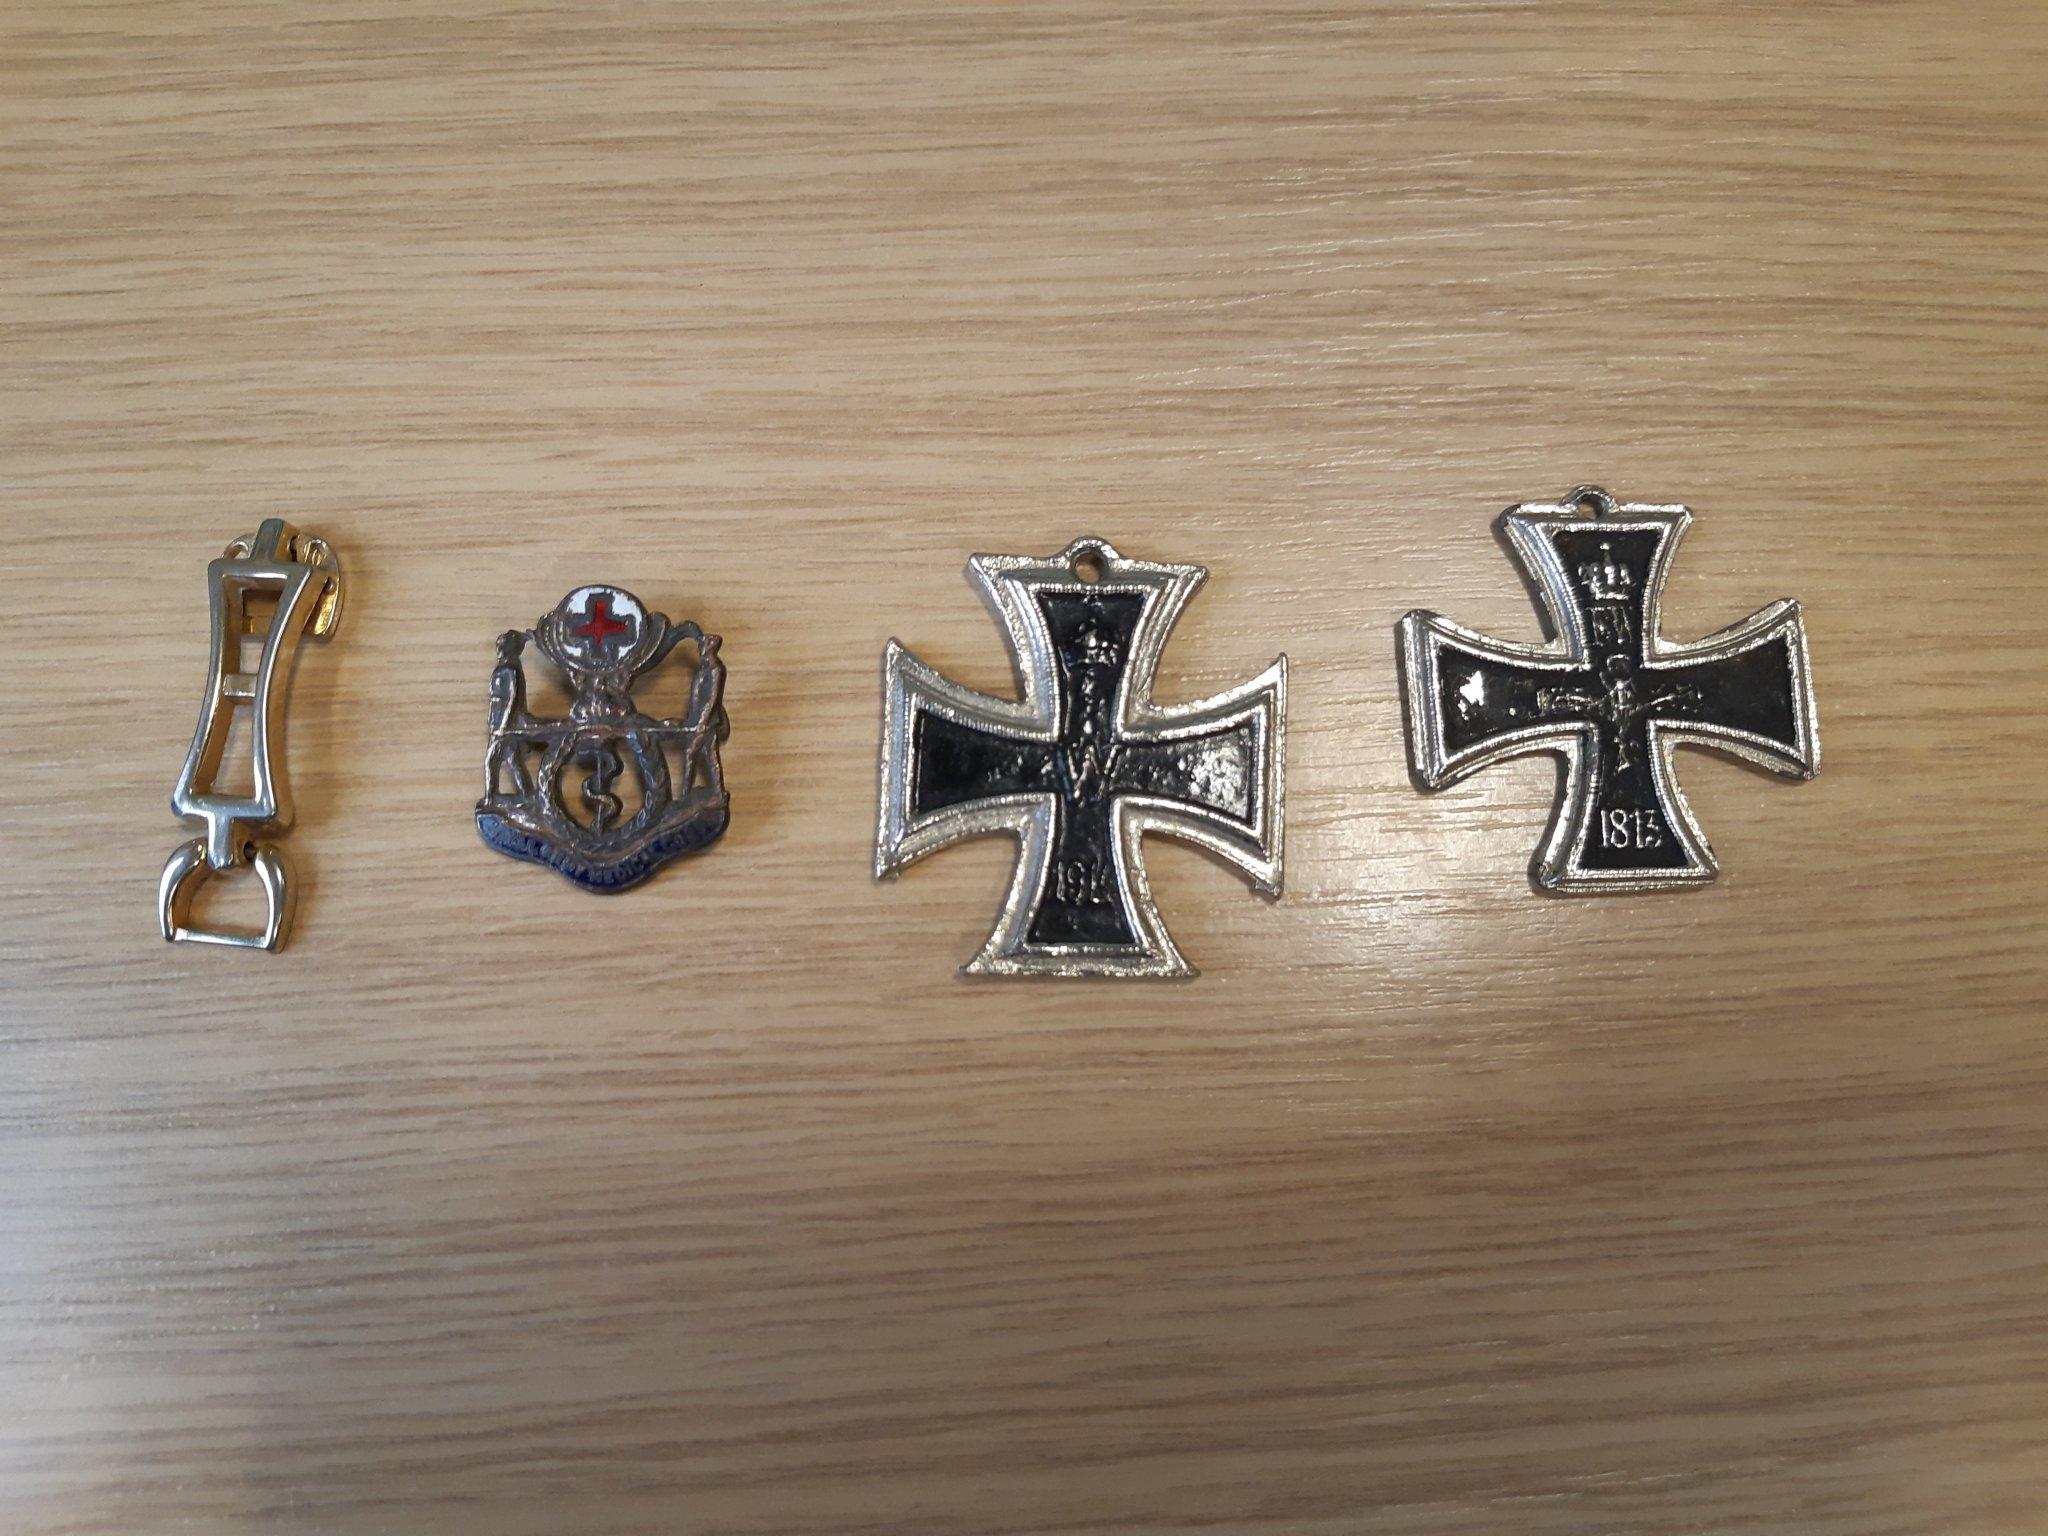 Do you recognise these items?